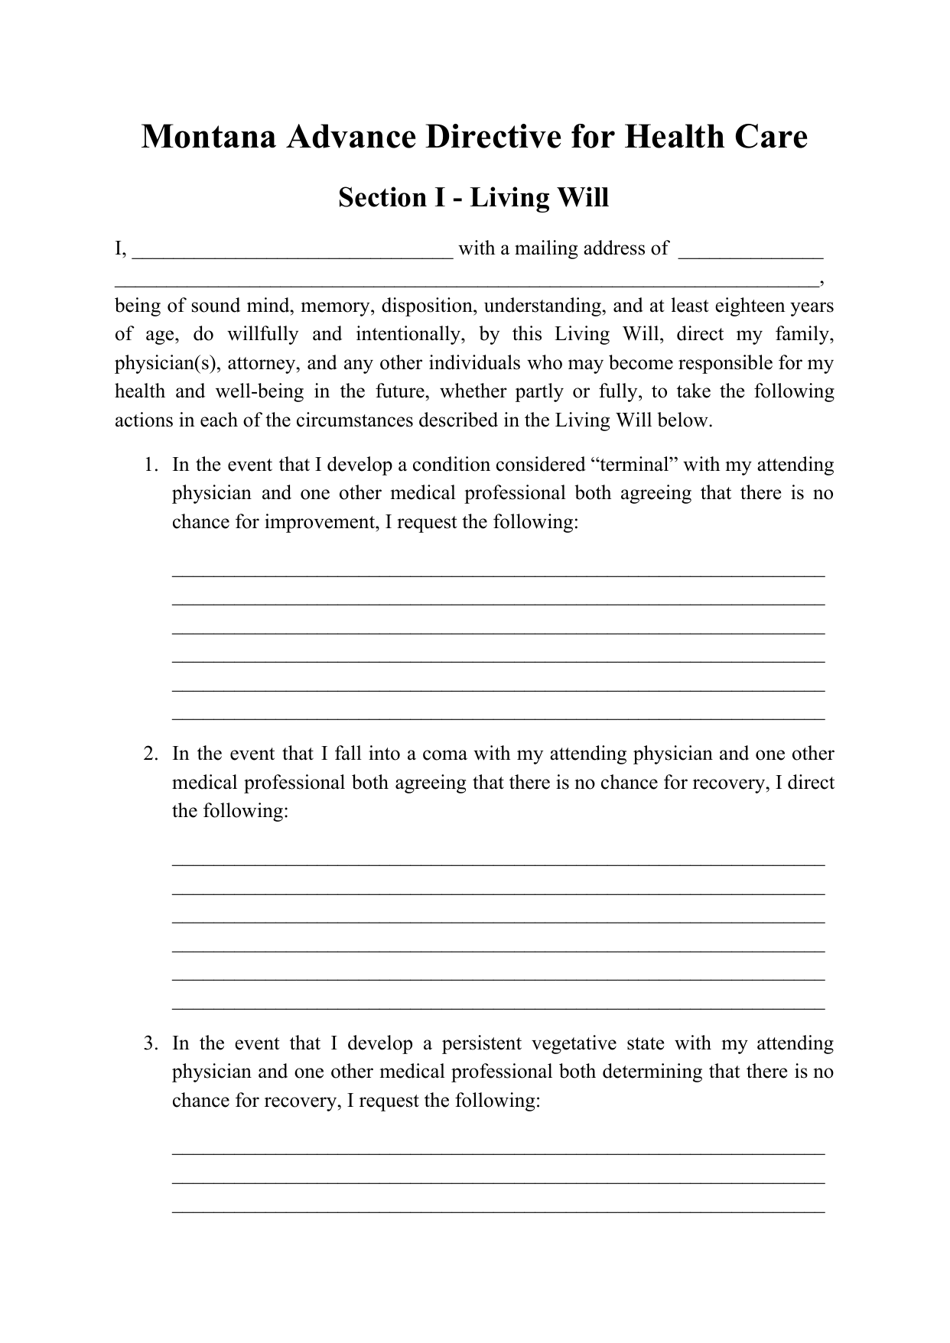 Advance Directive for Health Care Form - Montana, Page 1